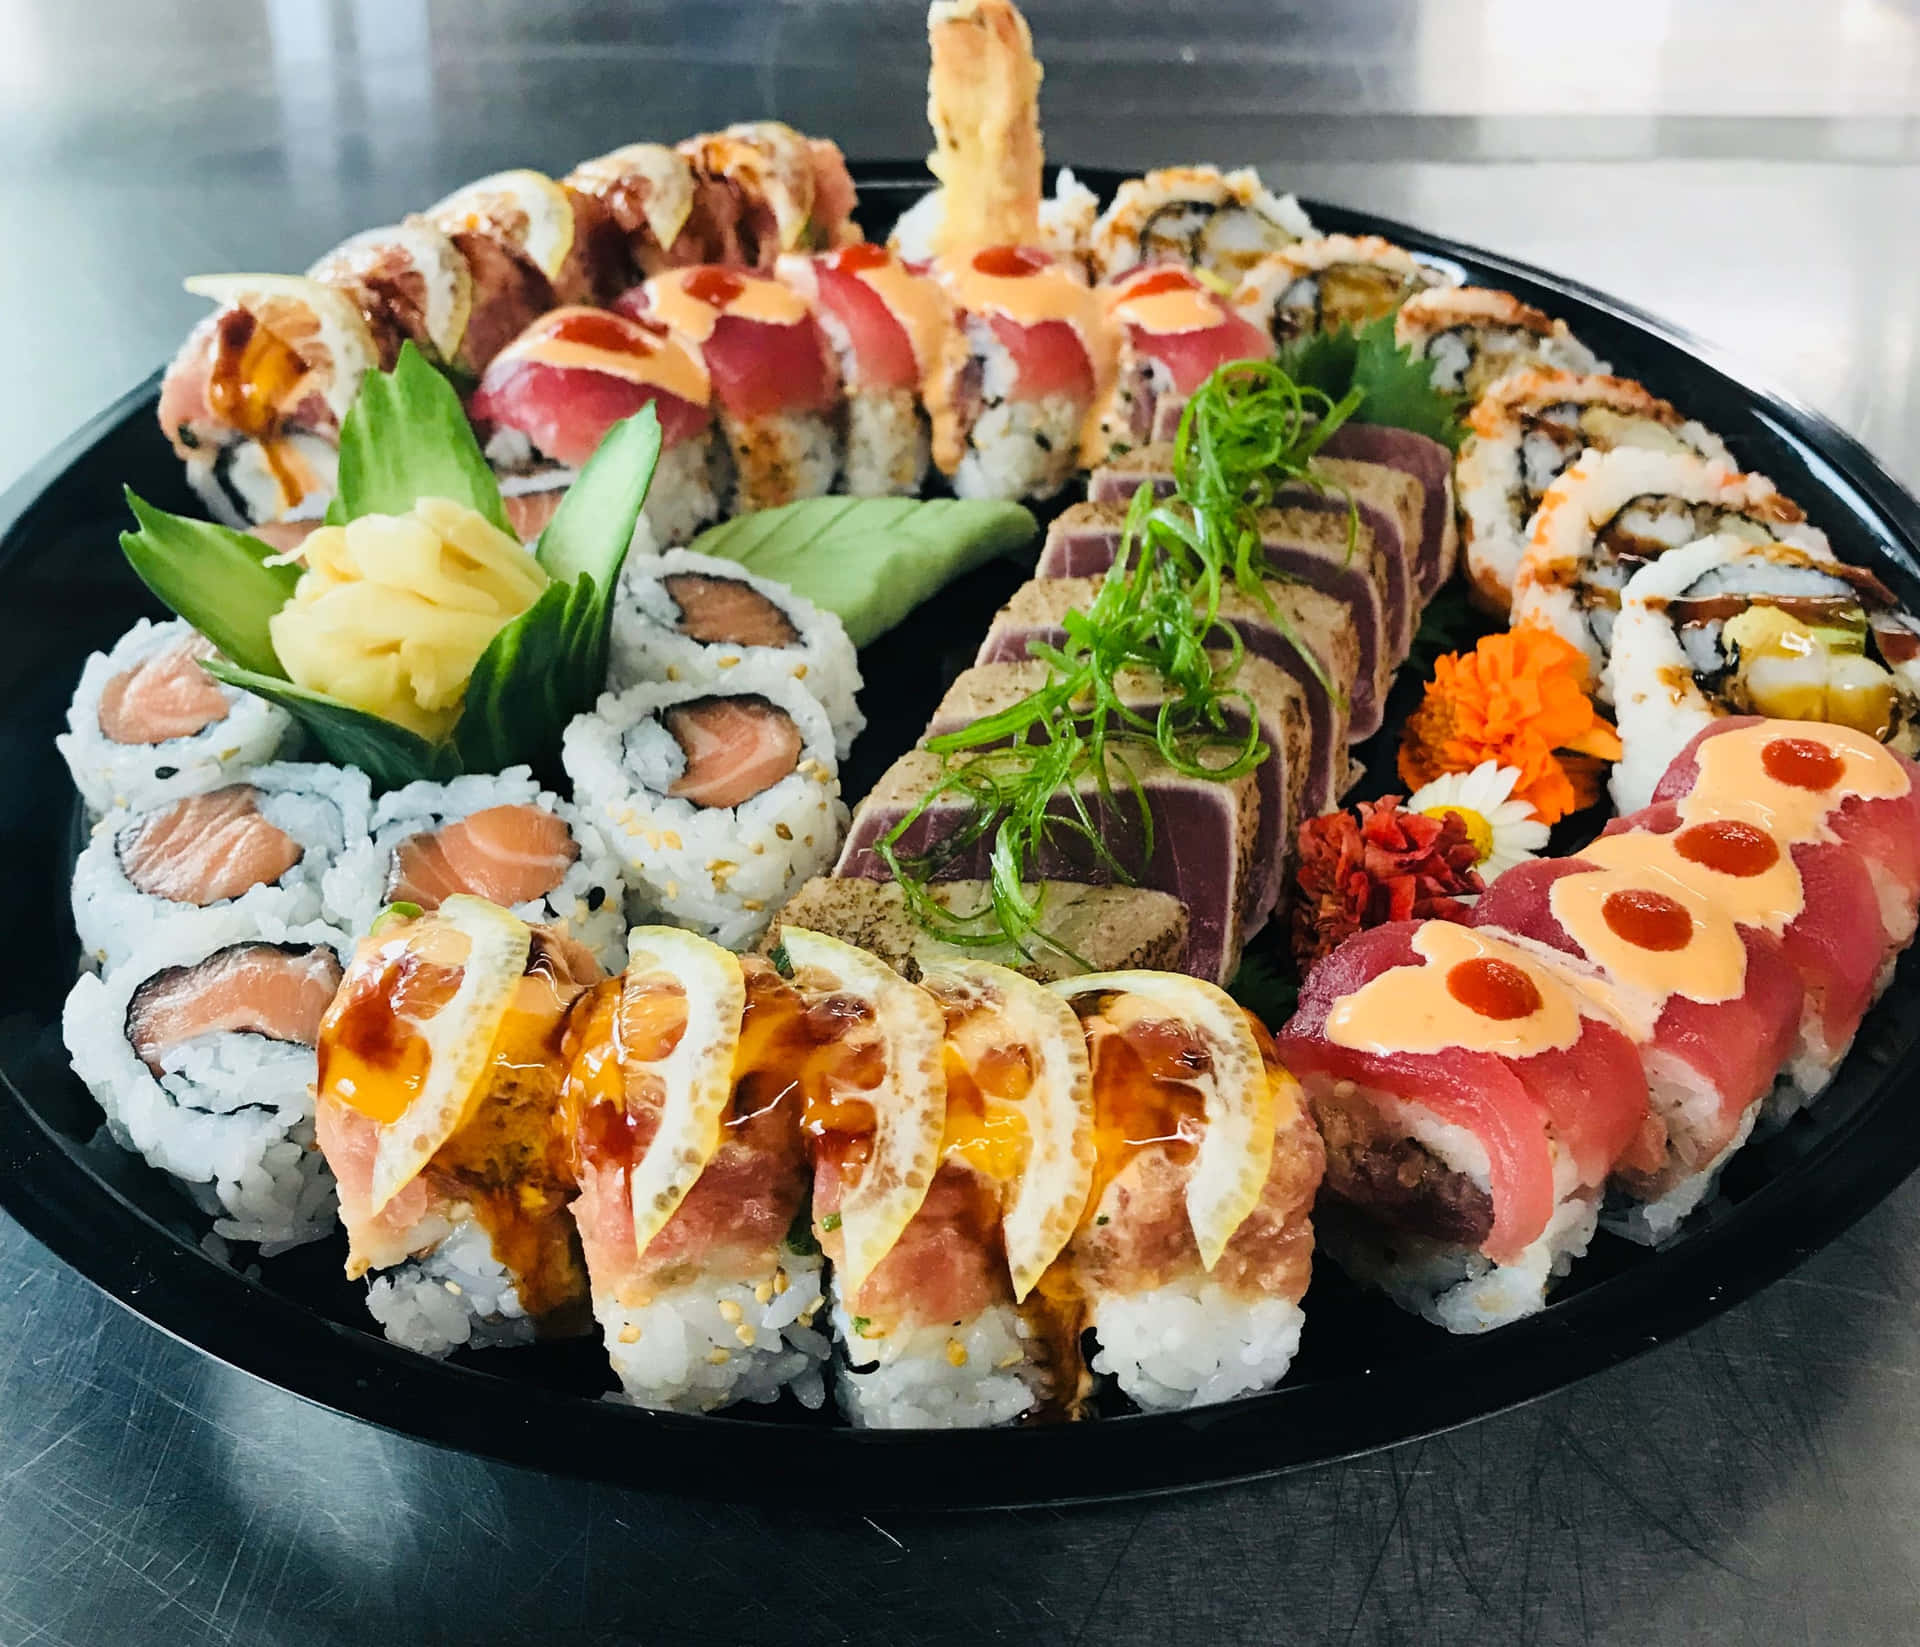 Enjoy fresh, colorful sushi with friends.